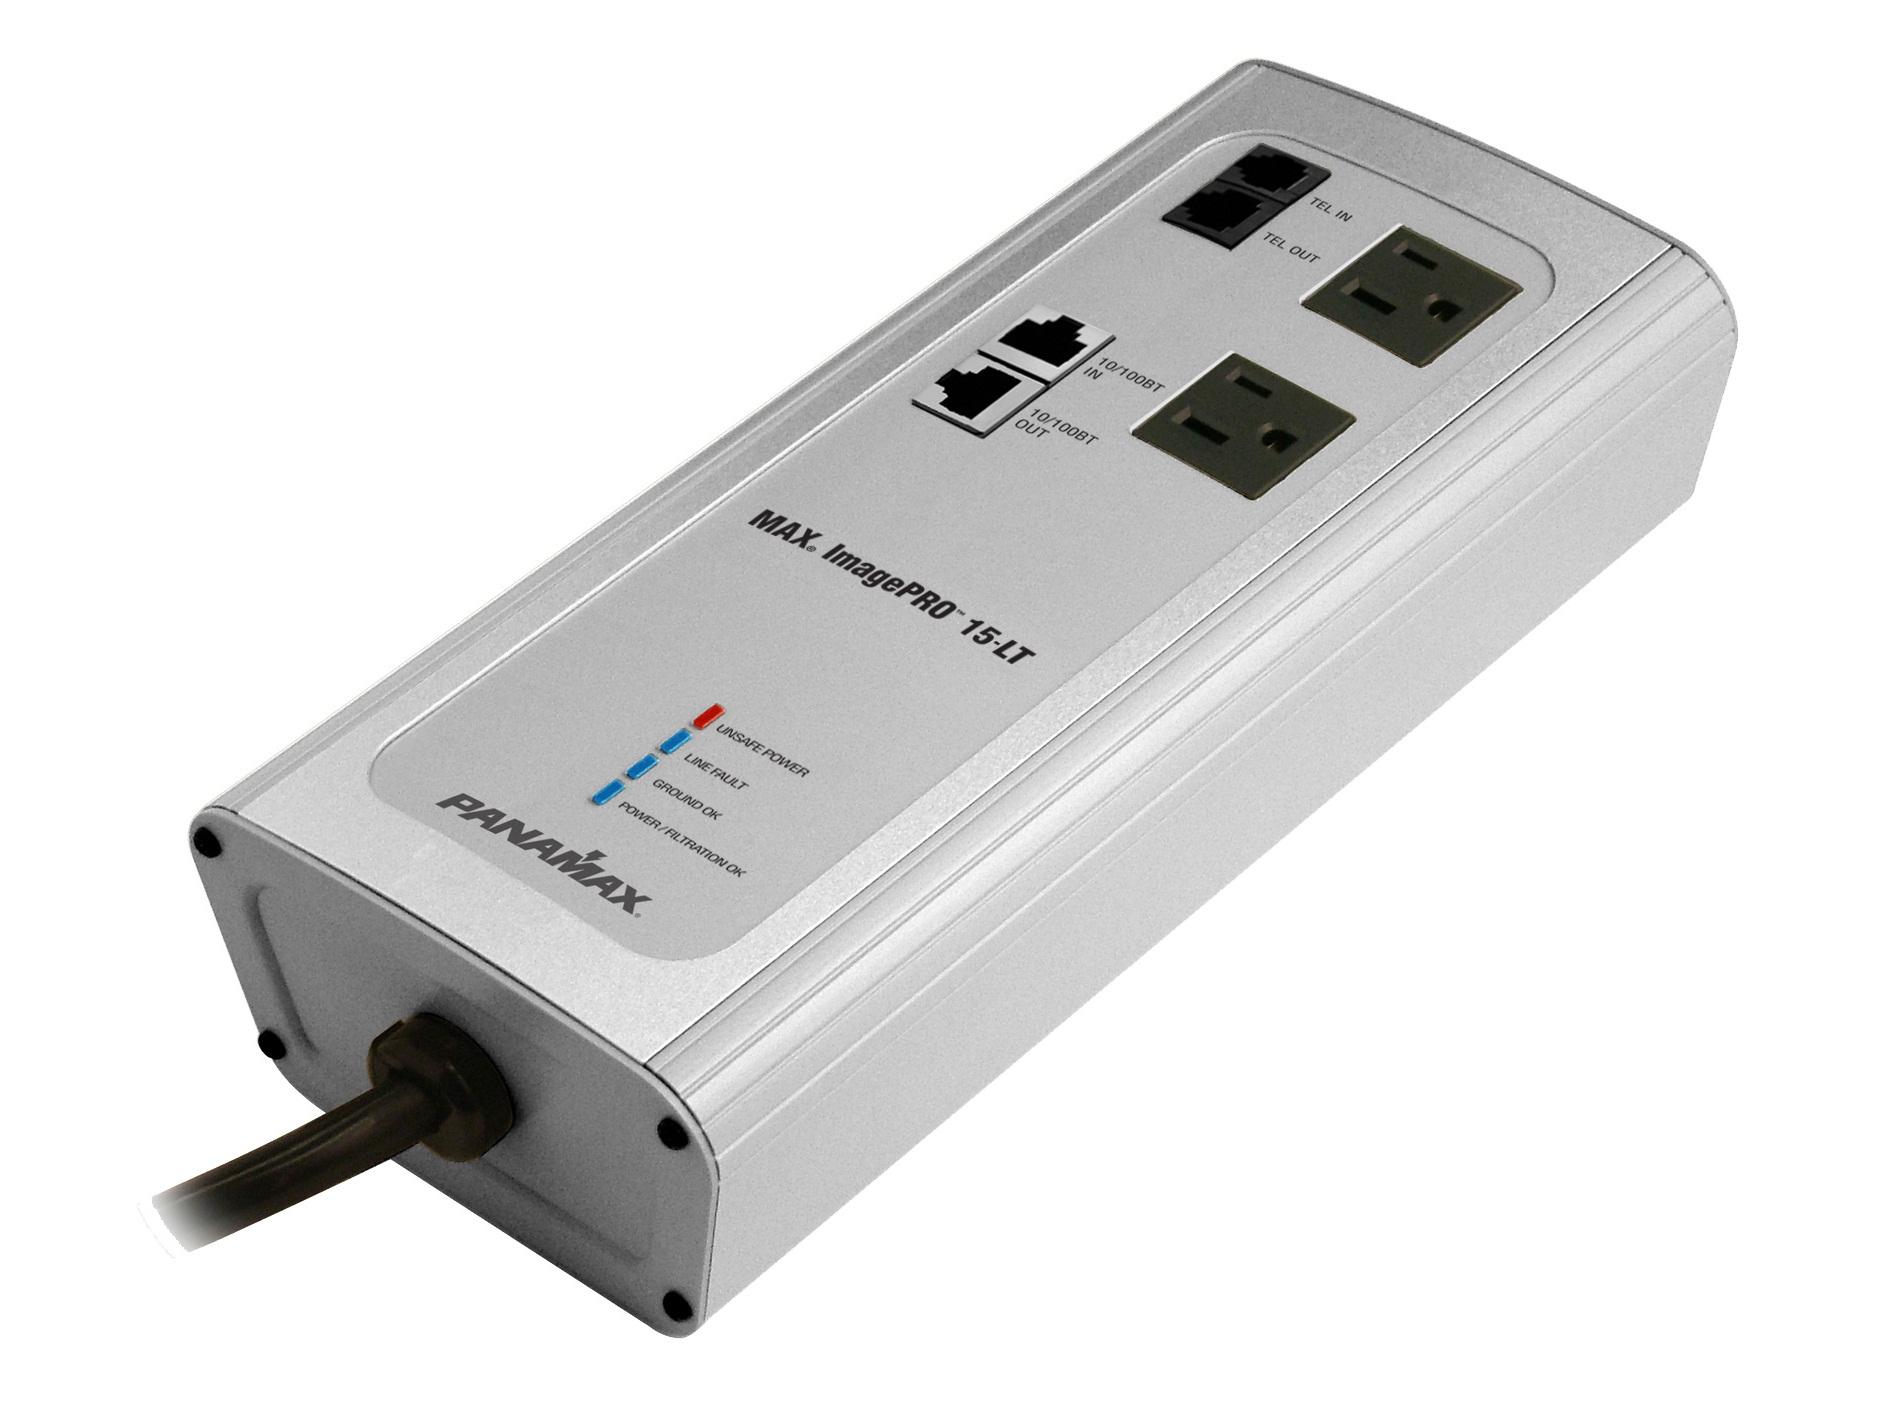 MIP-15LT 2 Outlets Telco/LAN Surge Protector by Panamax